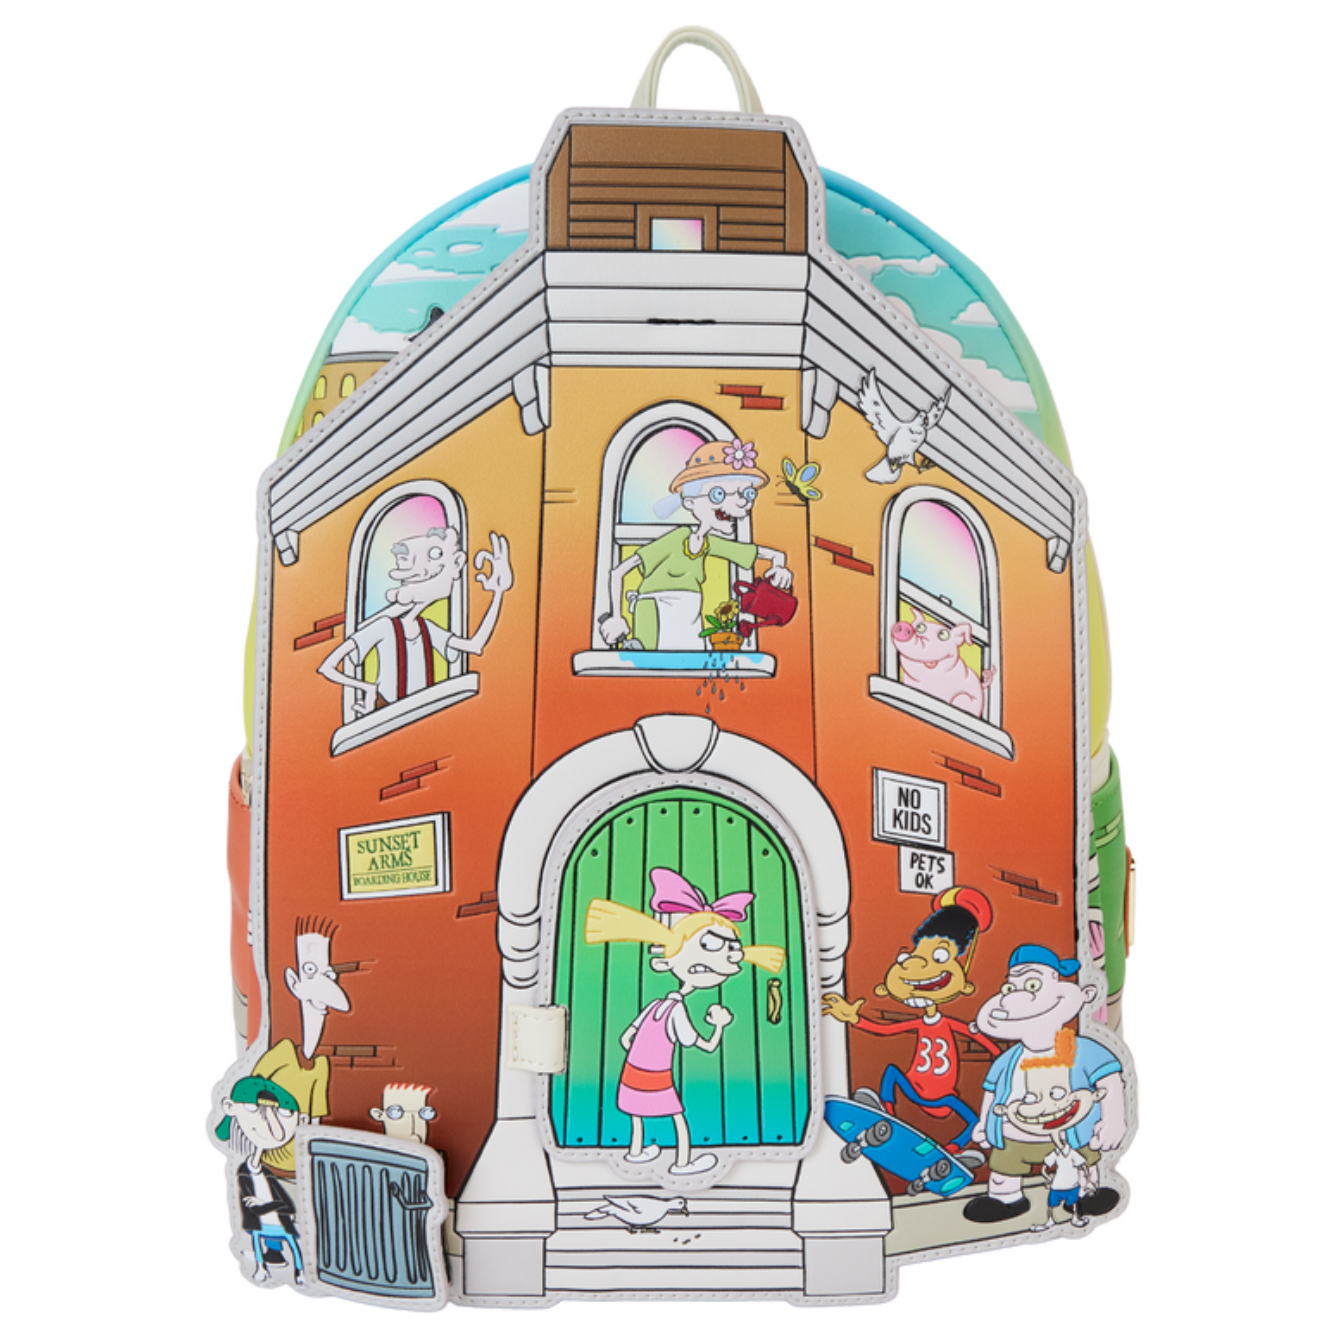 PRE-ORDER Hey Arnold! Sunset Arms Boarding House Mini Backpack